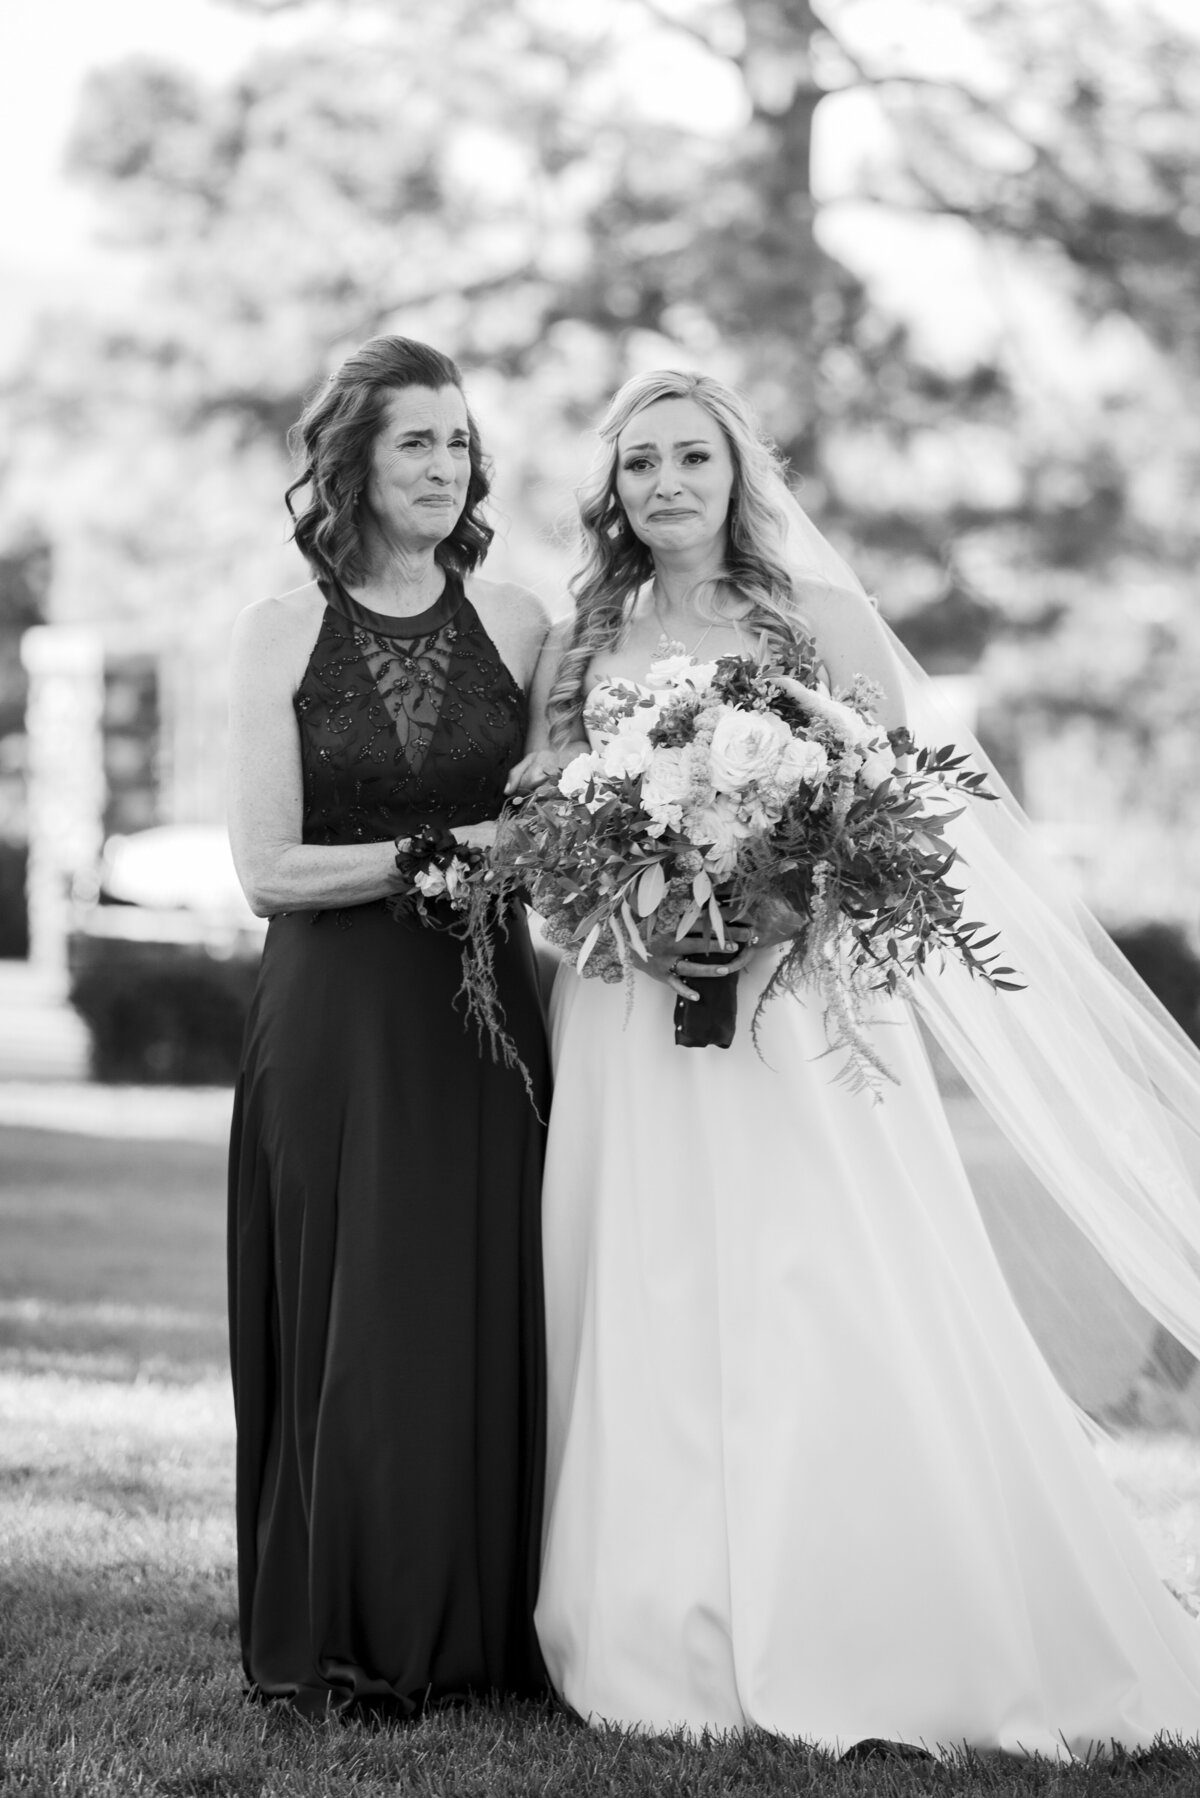 A candid moment with a bride and her mother as they walk up the aisle during the wedding ceremony.